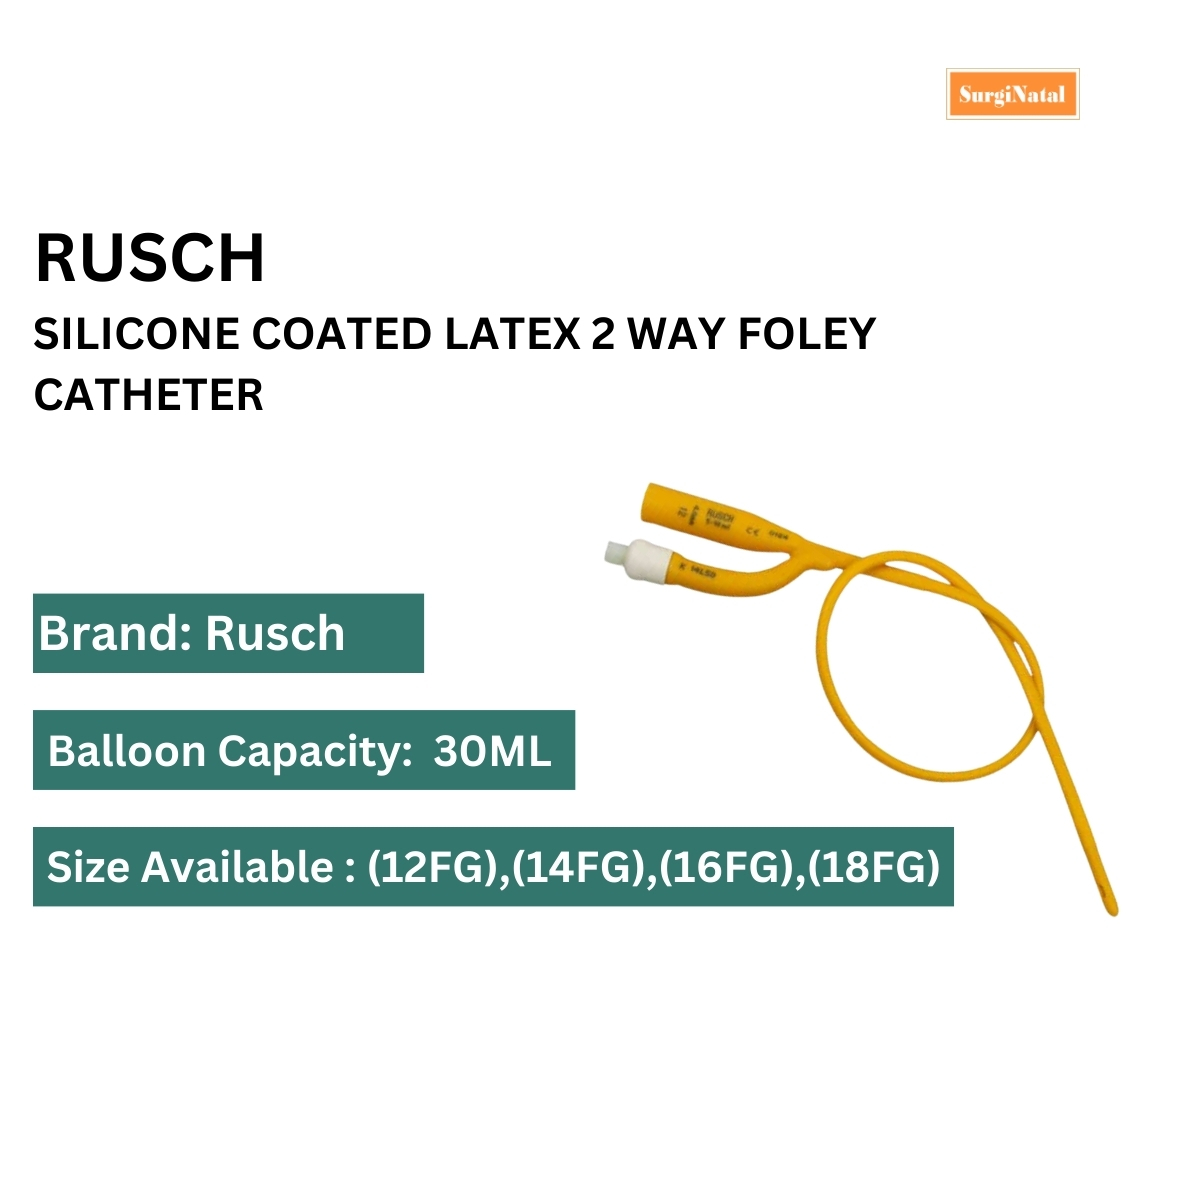 rusch silicone coated latex 2 way foley catheter